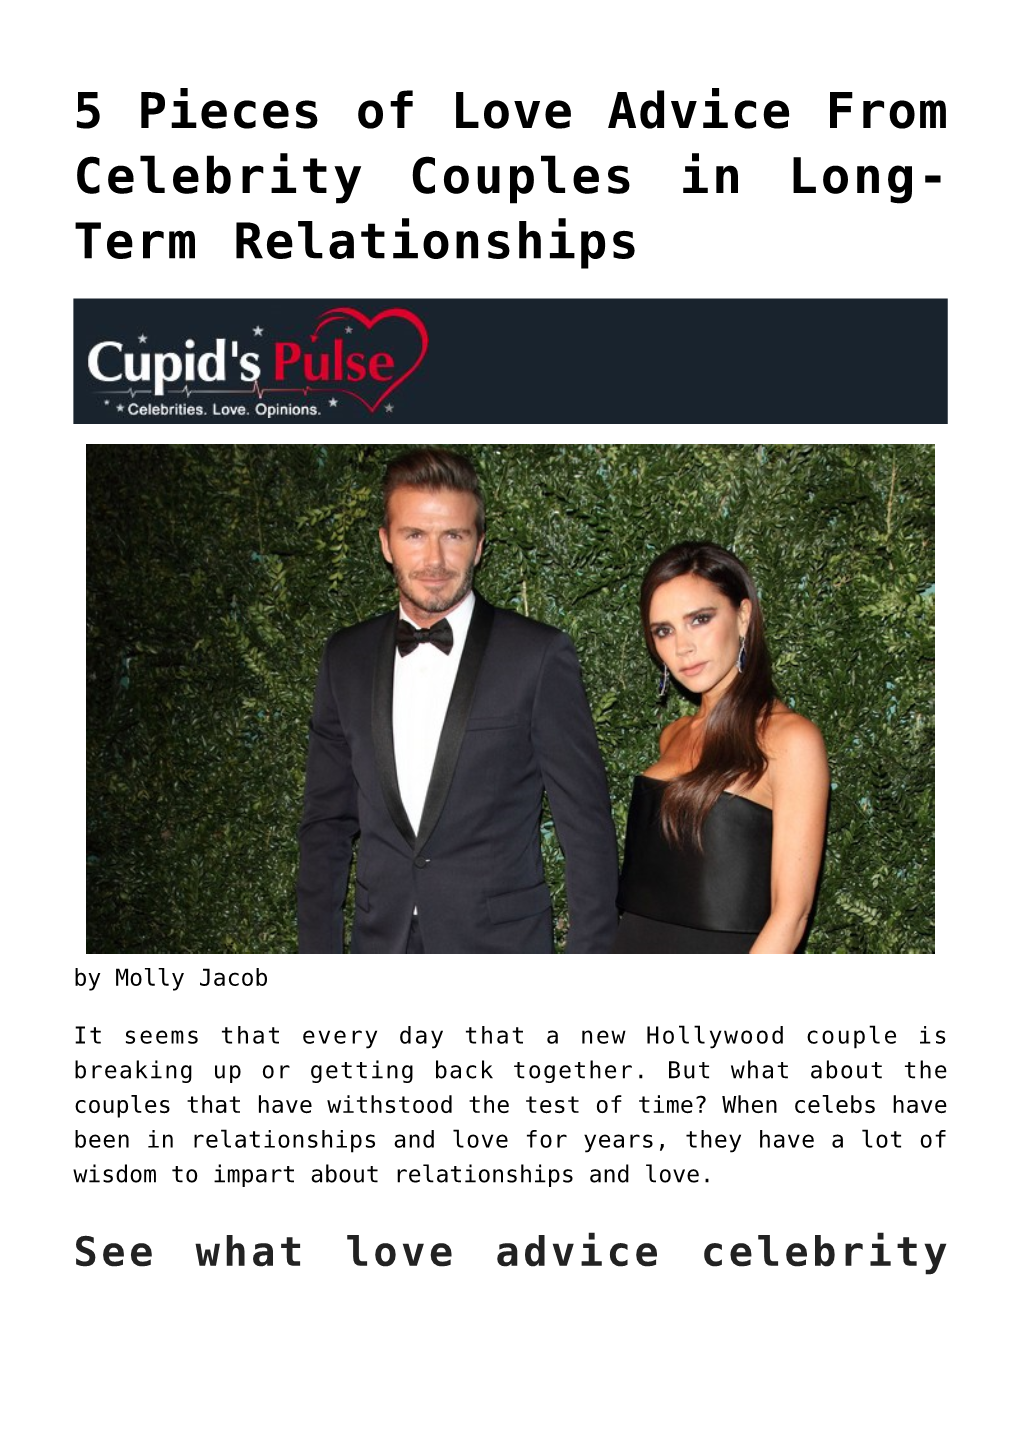 5 Pieces of Love Advice from Celebrity Couples in Long-Term